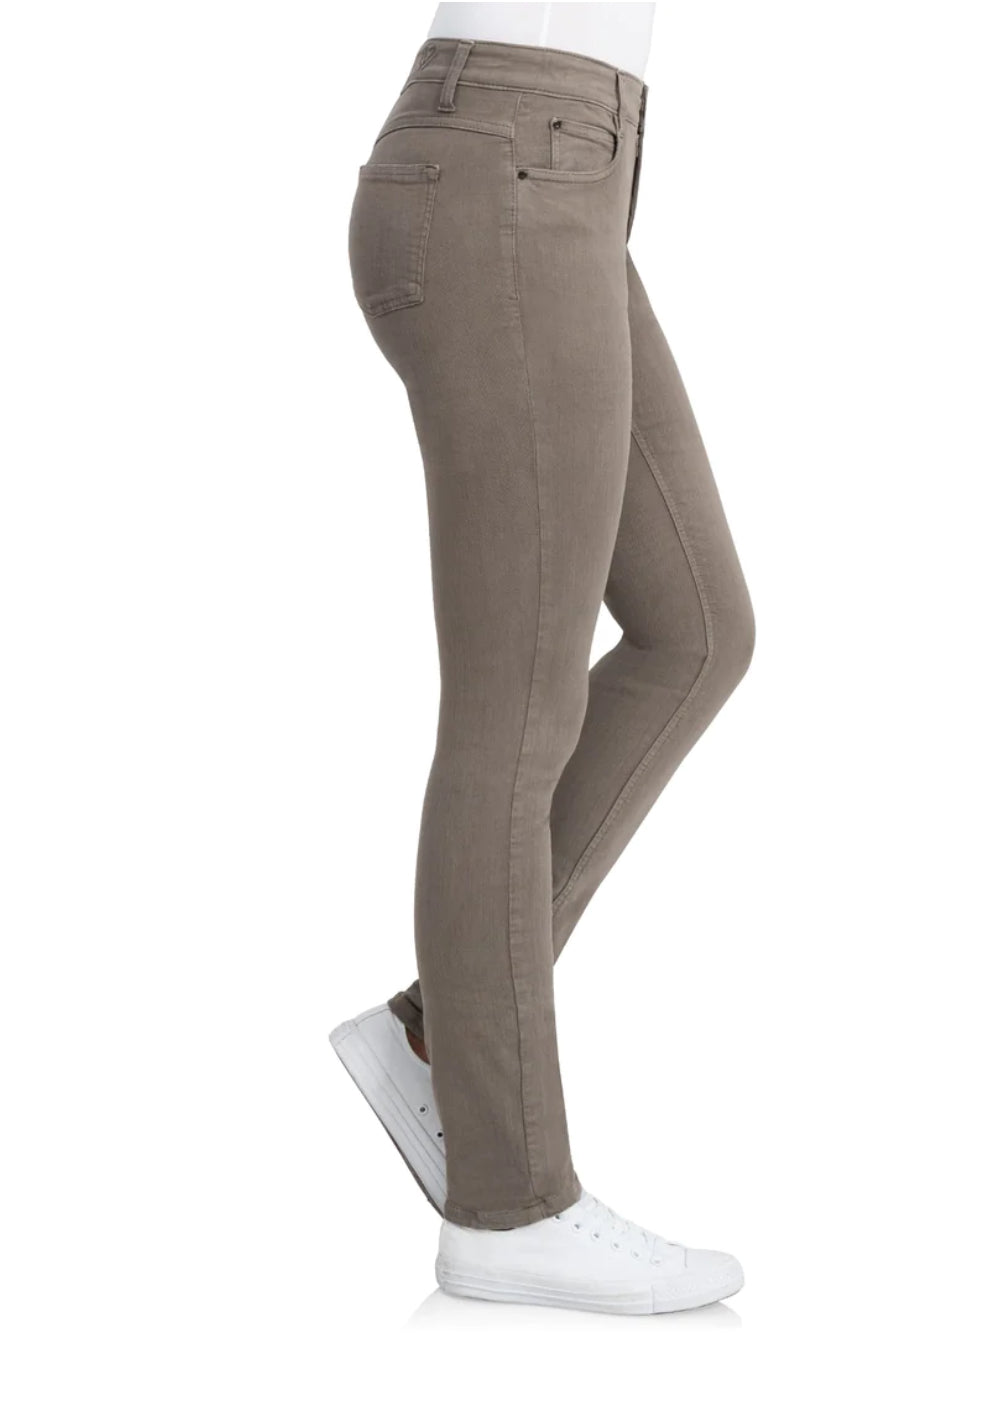 Wunderjeans Taupe